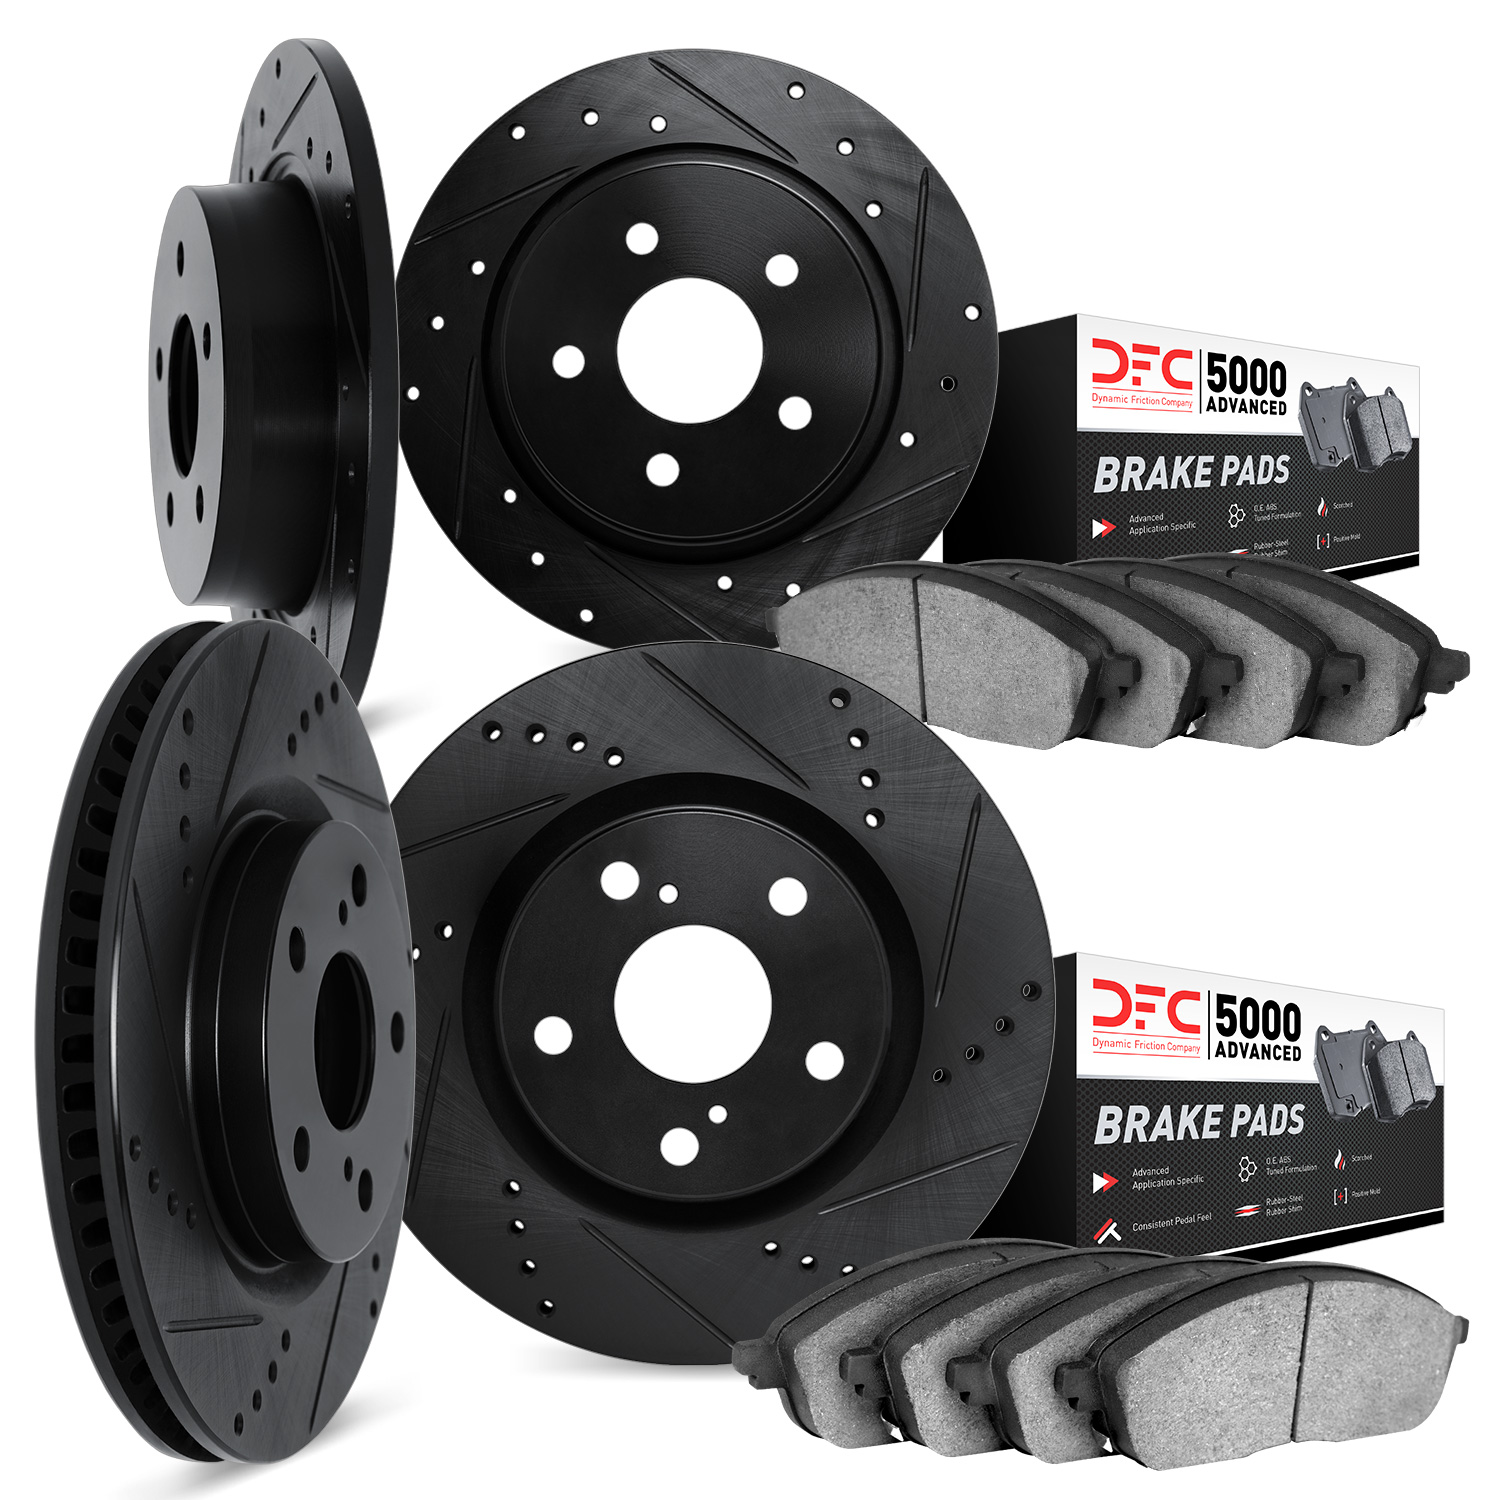 8504-67095 Drilled/Slotted Brake Rotors w/5000 Advanced Brake Pads Kit [Black], 2000-2001 Infiniti/Nissan, Position: Front and R